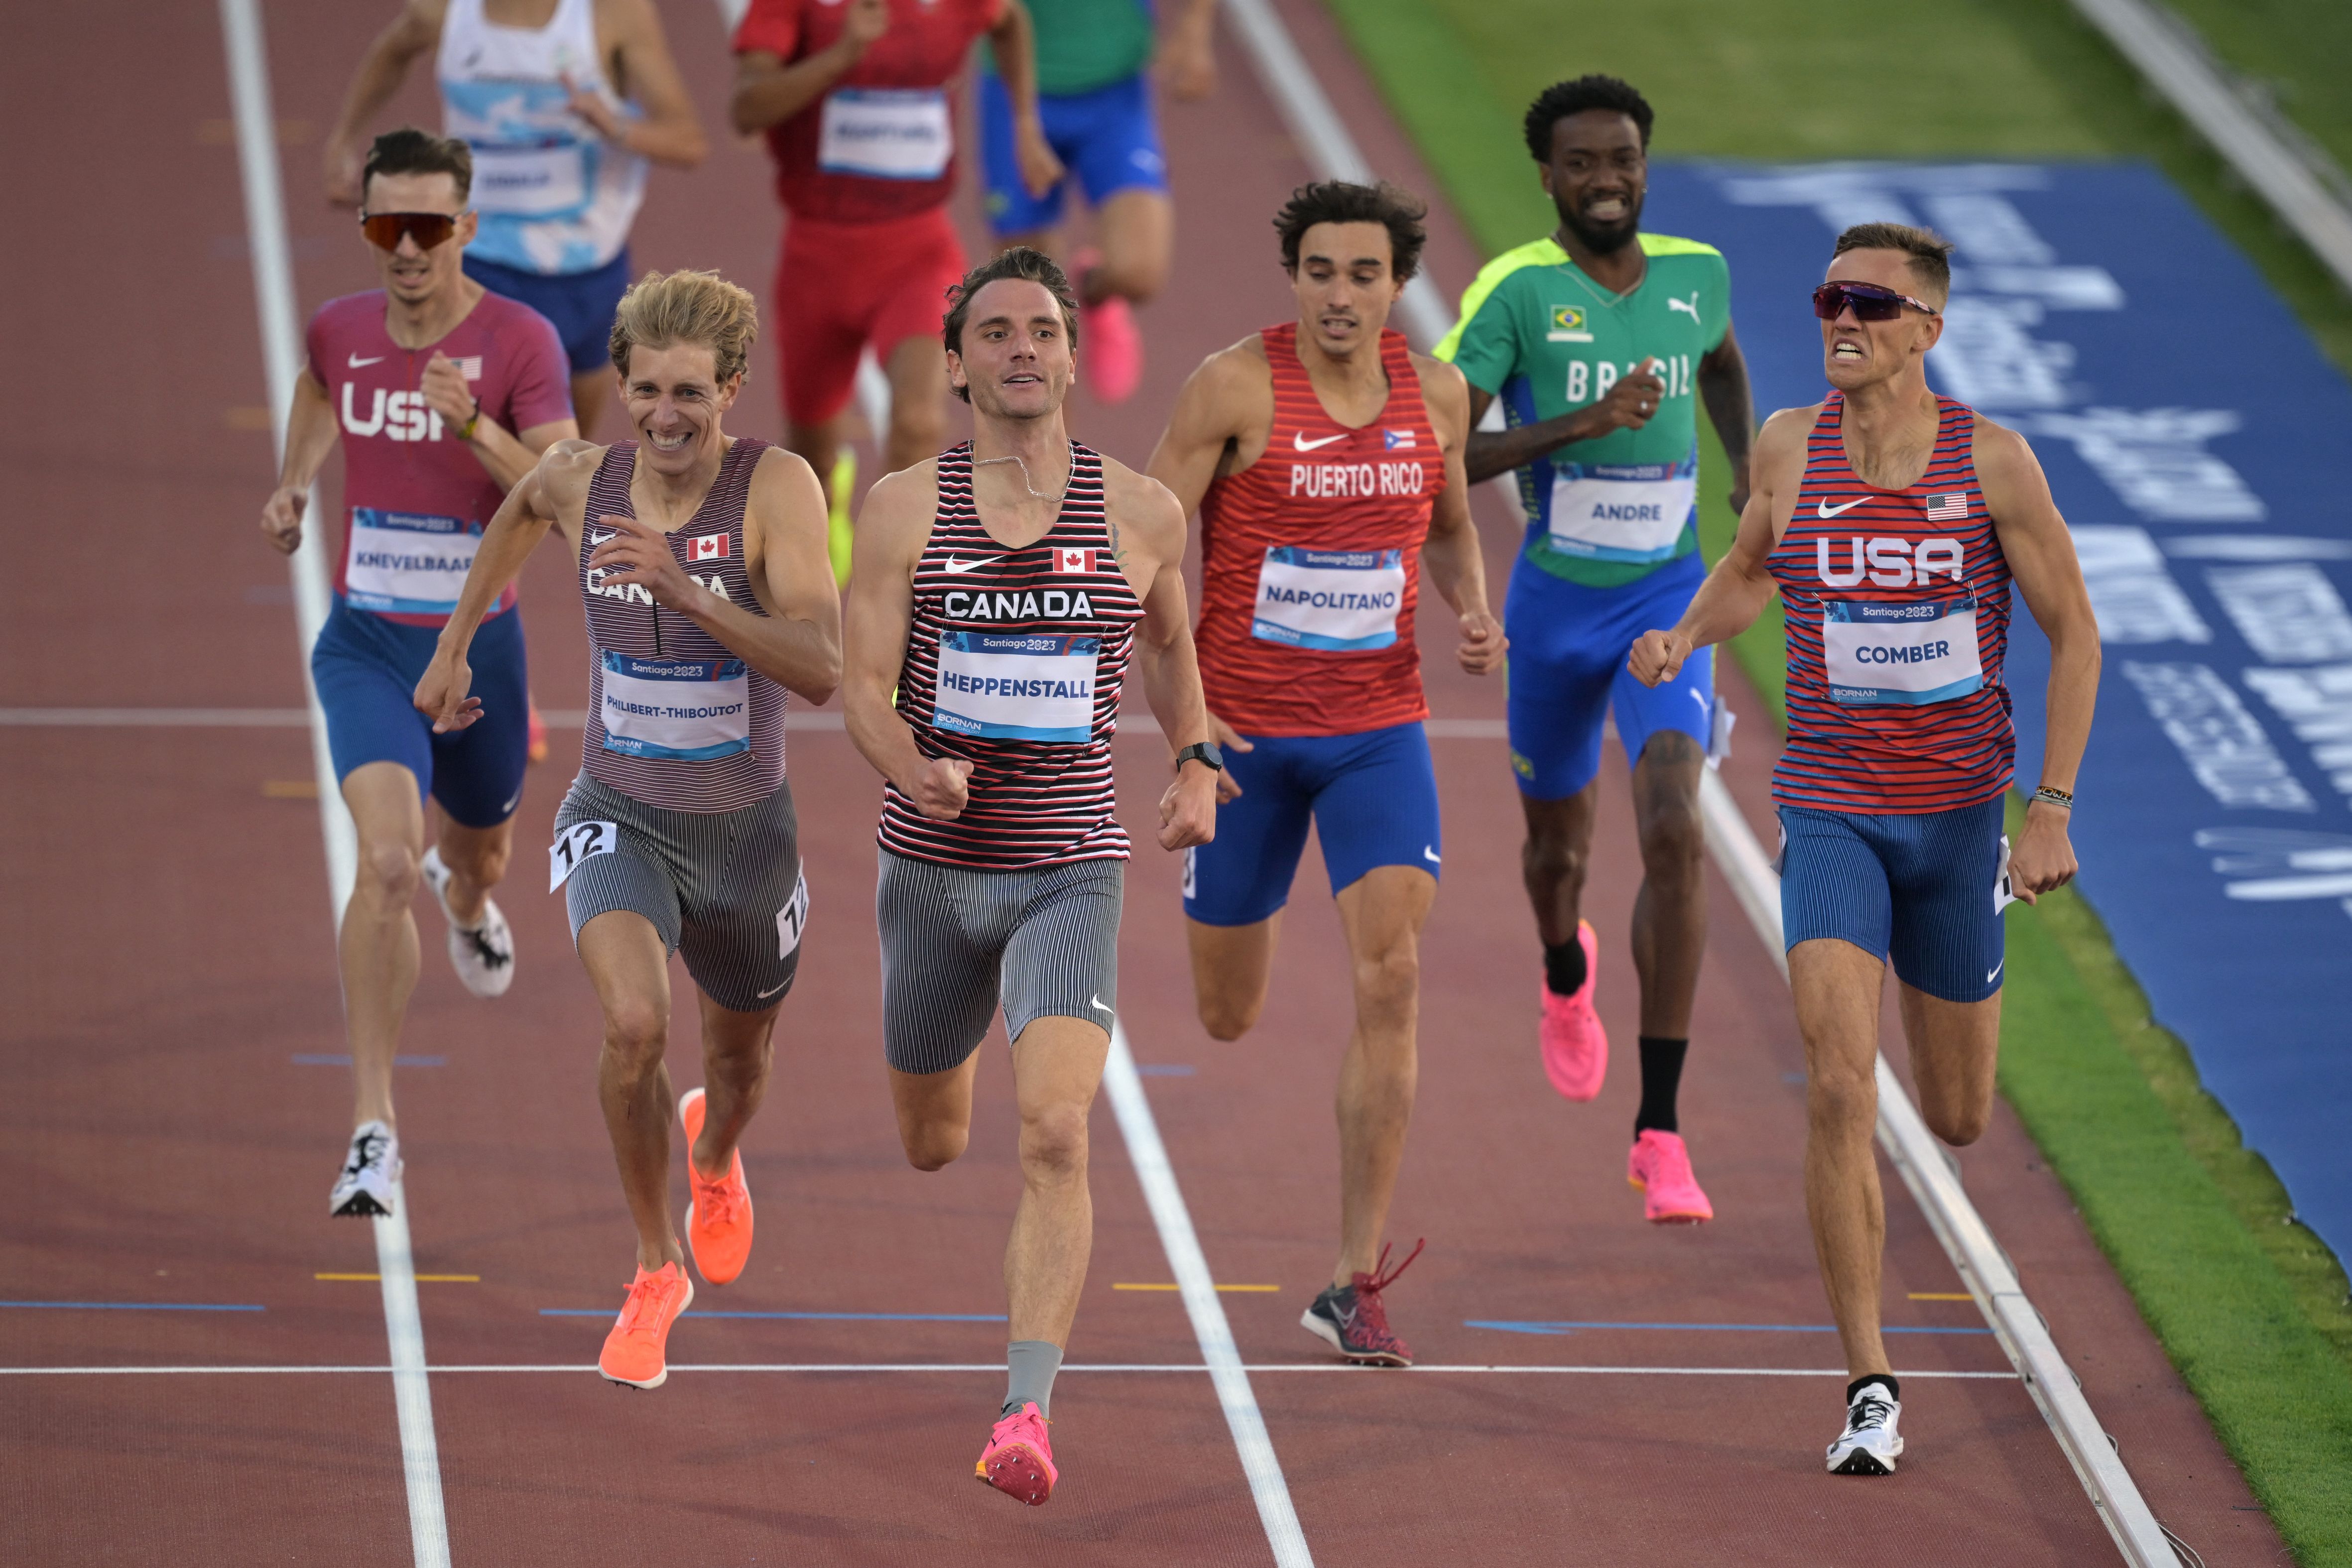 Charles Philibert-Thiboutot and Robert Joseph Heppenstall battle for the 5000m title in Santiago de Chile